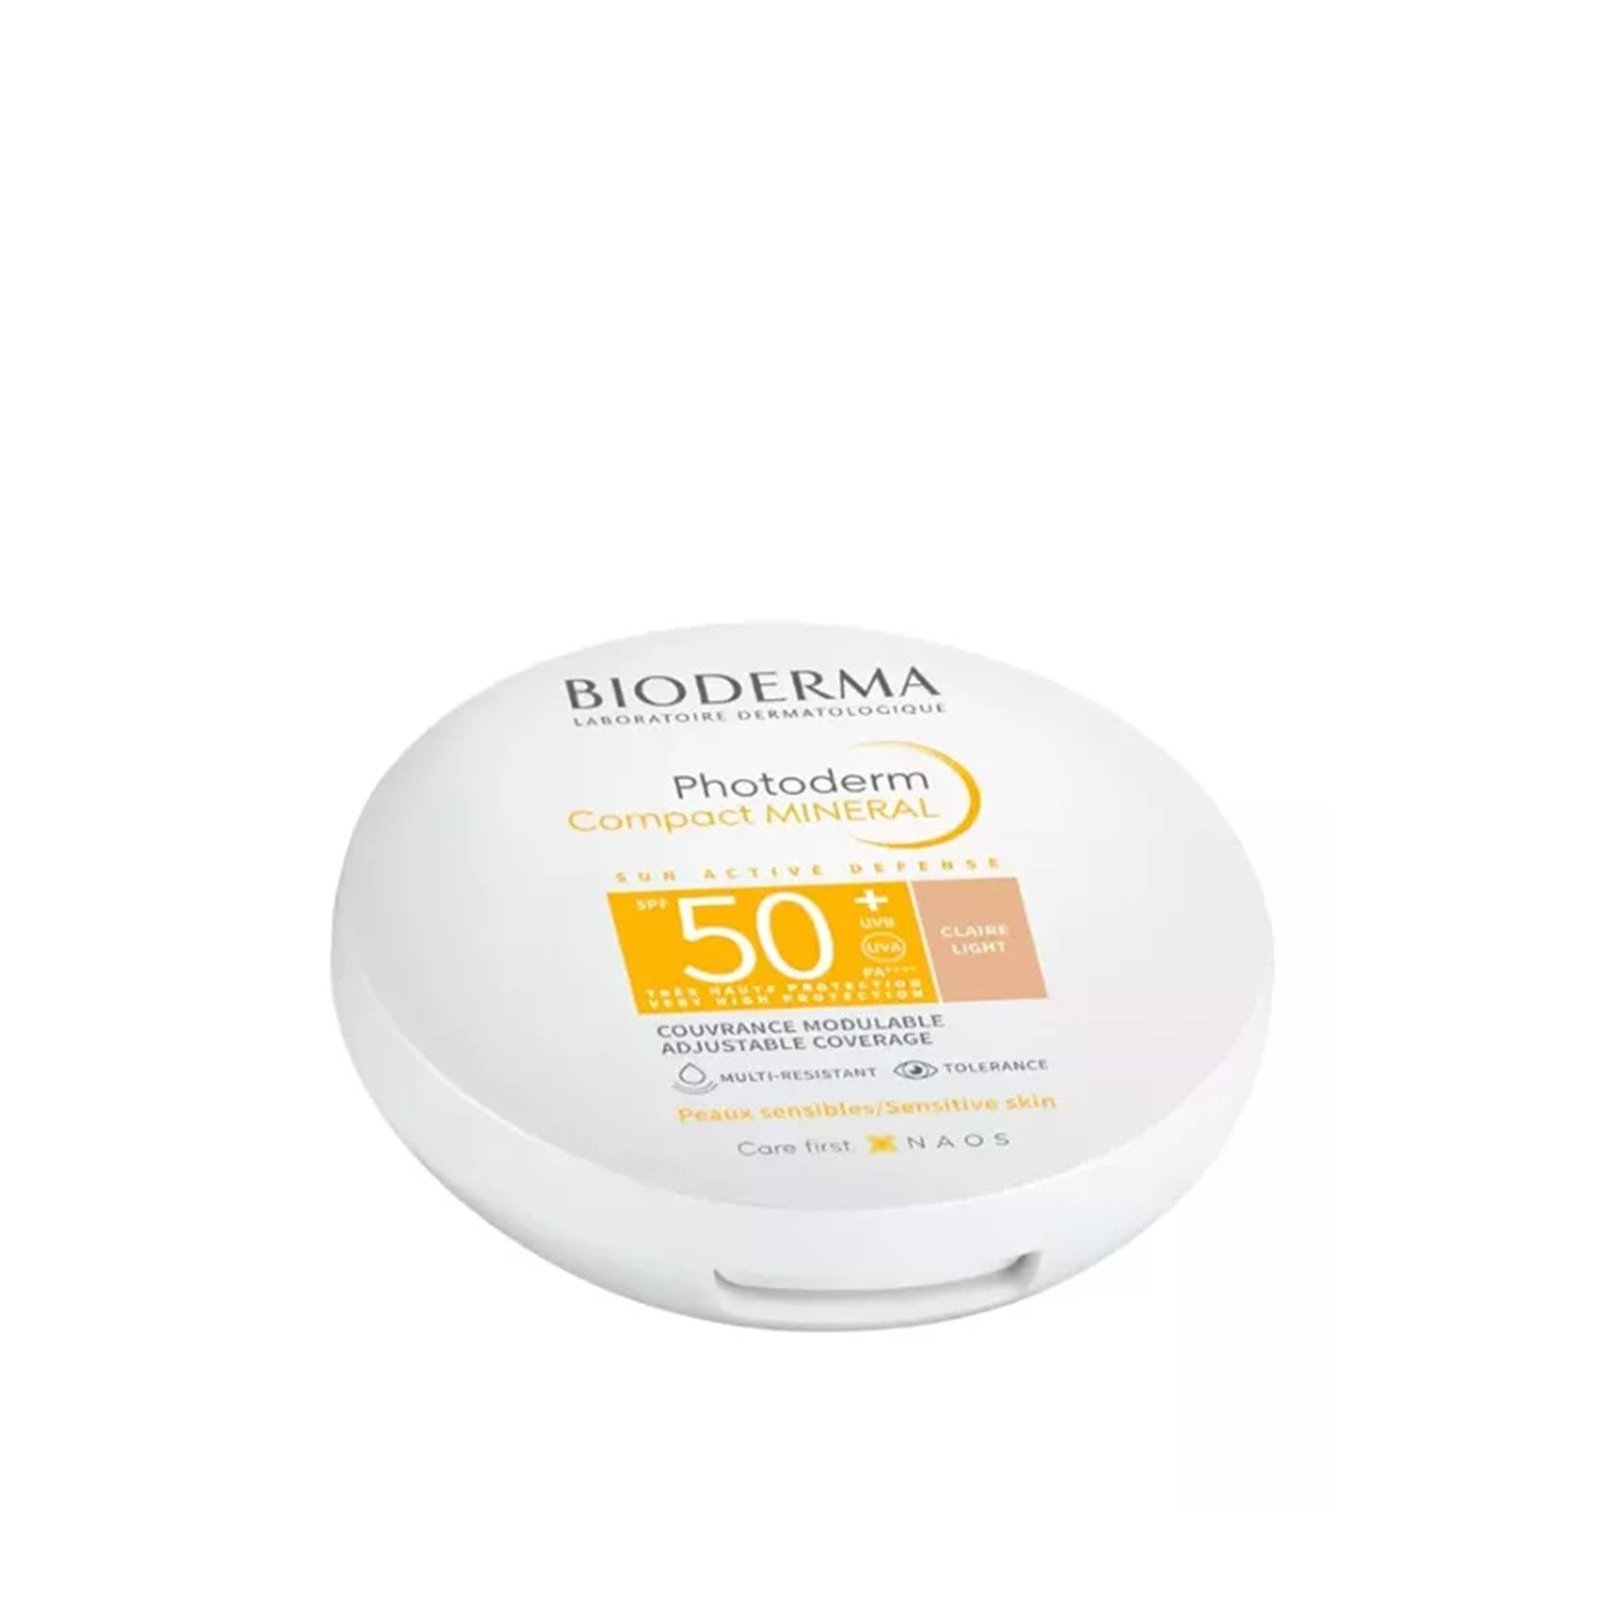 Bioderma Photoderm Compact Mineral SPF50+ Claire 10g (0.35oz)